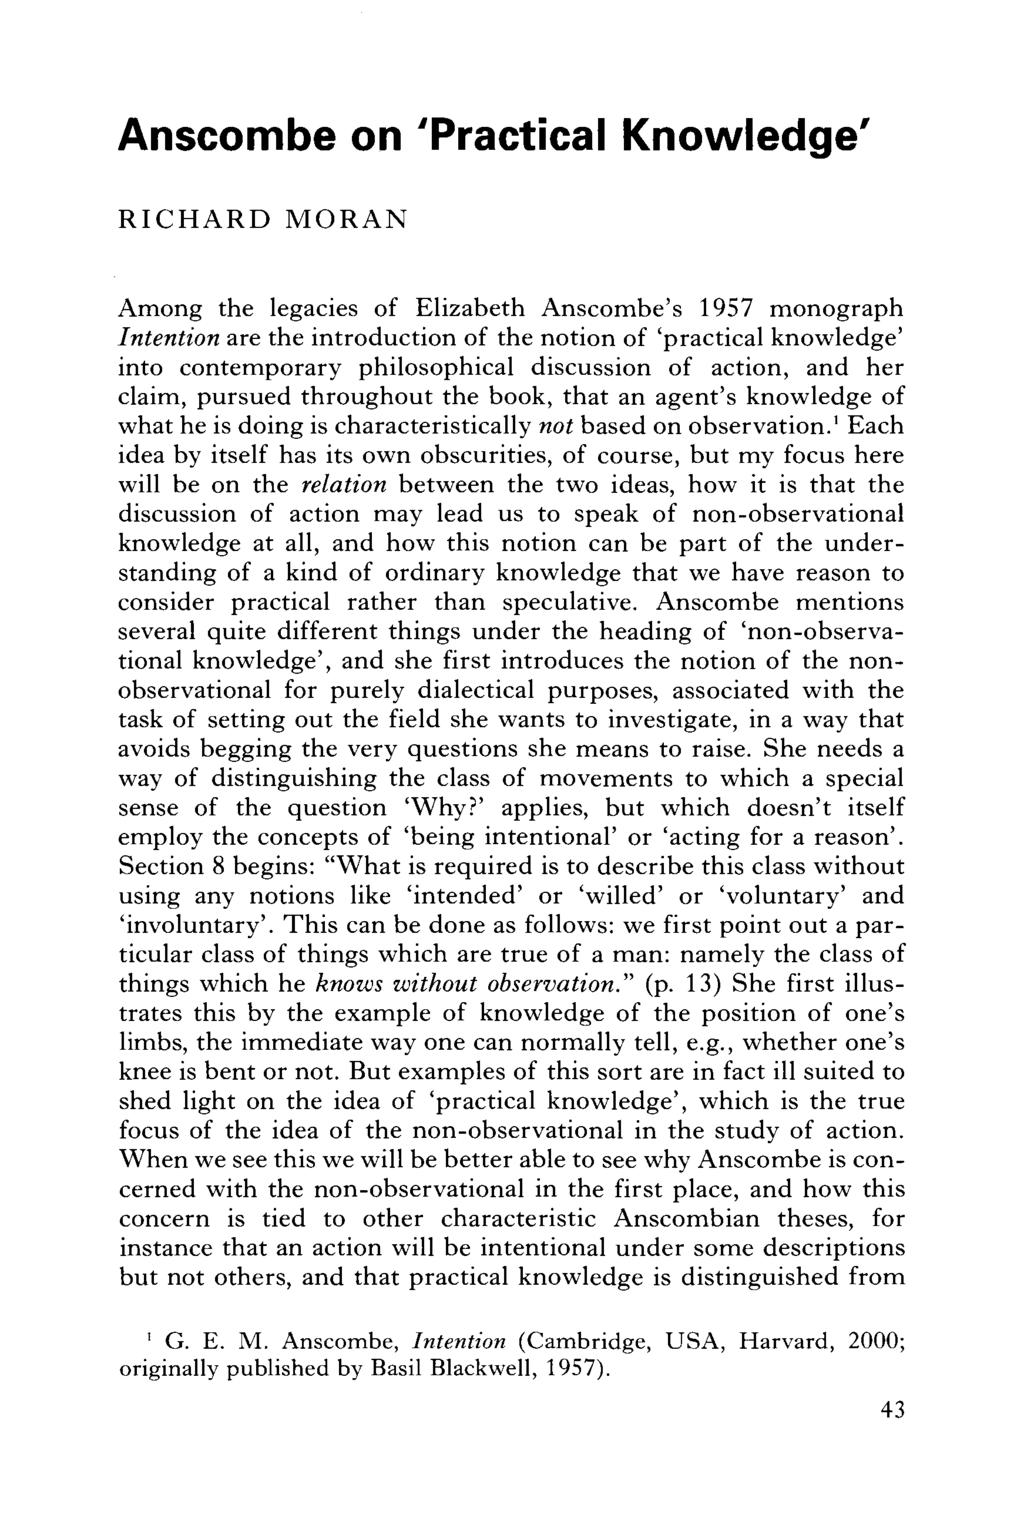 Anscombe on 'Practical Knowledge' RICHARD MORAN Among the legacies of Elizabeth Anscombe's 1957 monograph Intention are the introduction of the notion of 'practical knowledge' into contemporary